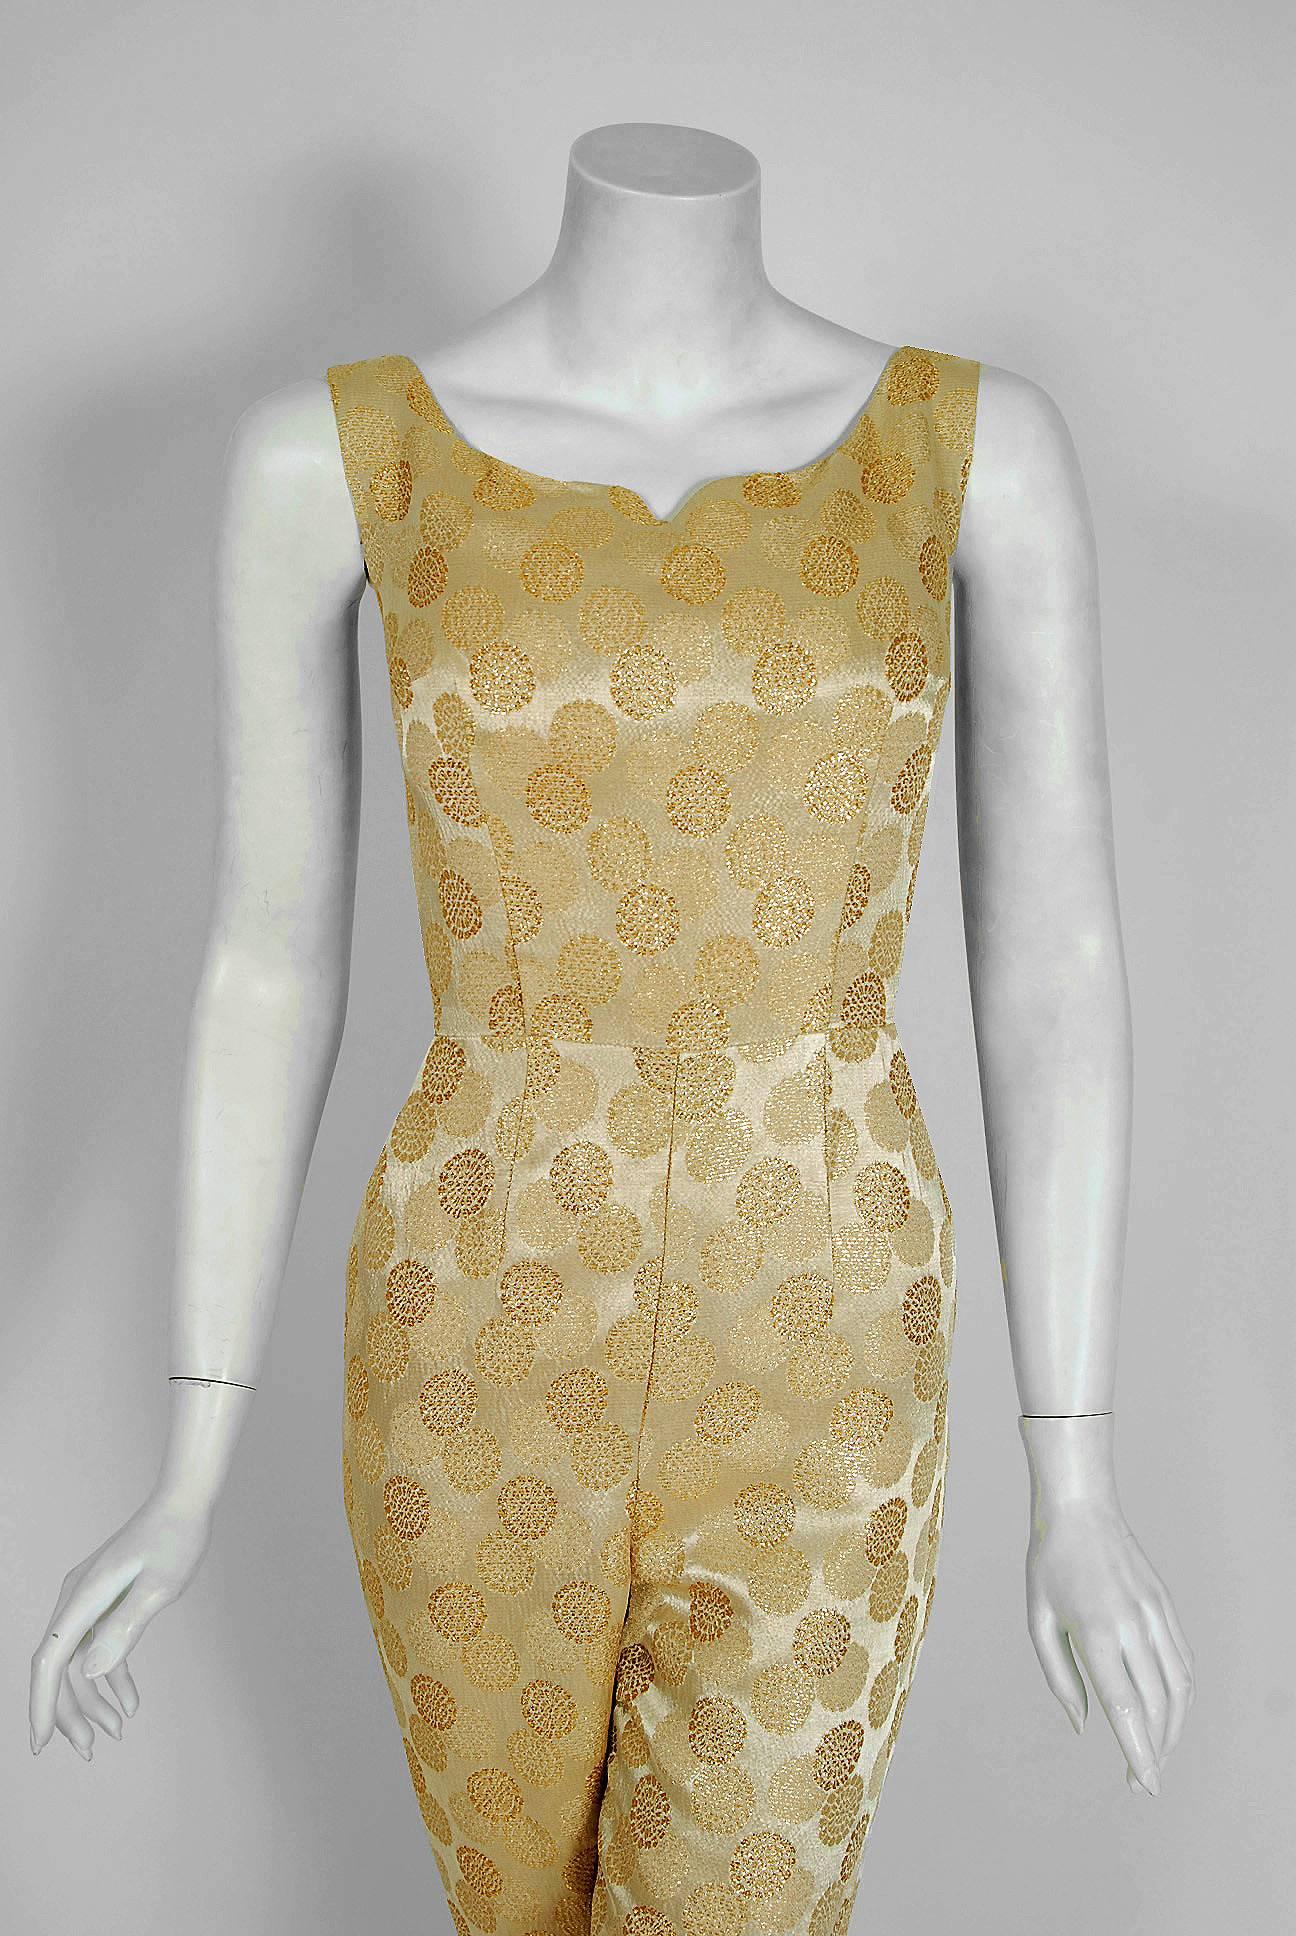 Words can not describe how beautiful this 1950's Bullock's Wilshire jumpsuit ensemble is! It's fashioned from fully-lined metallic gold atomic patterned silk-lame brocade. It is cut in that classic pin-up bombshell style; all curves and sexiness.